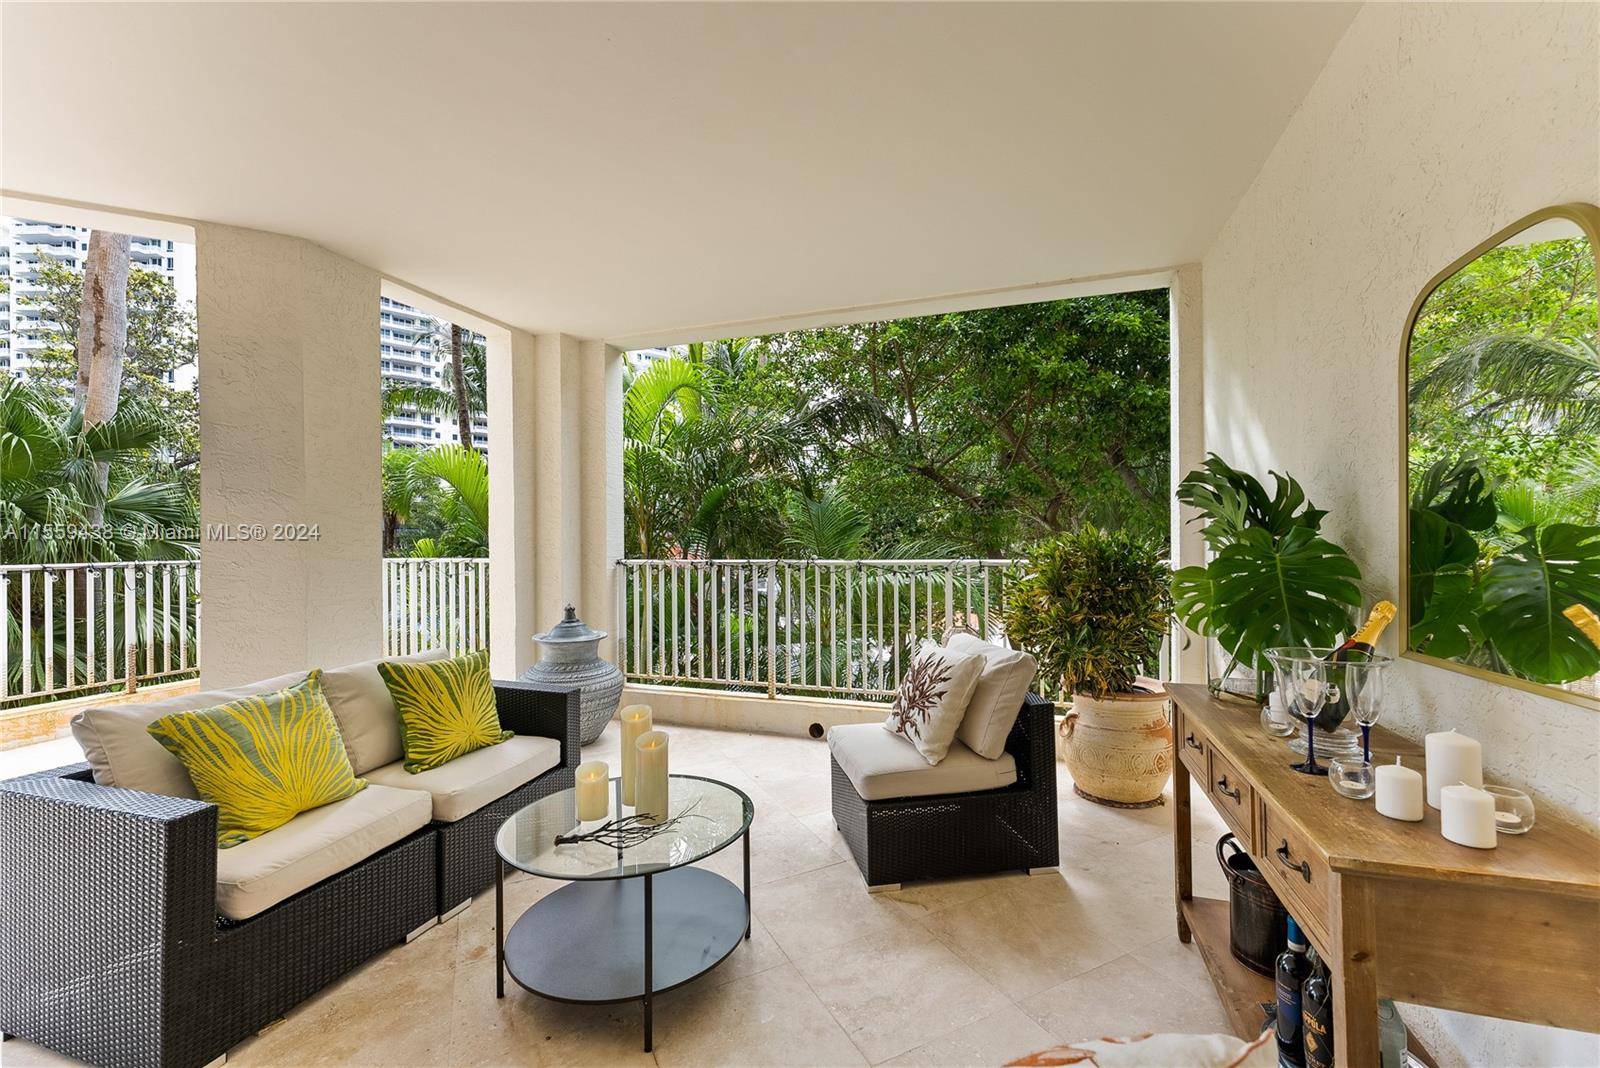 2 Bedroom 2 Bath meticulously renovated apartment at The Ocean Club in Key Biscayne.